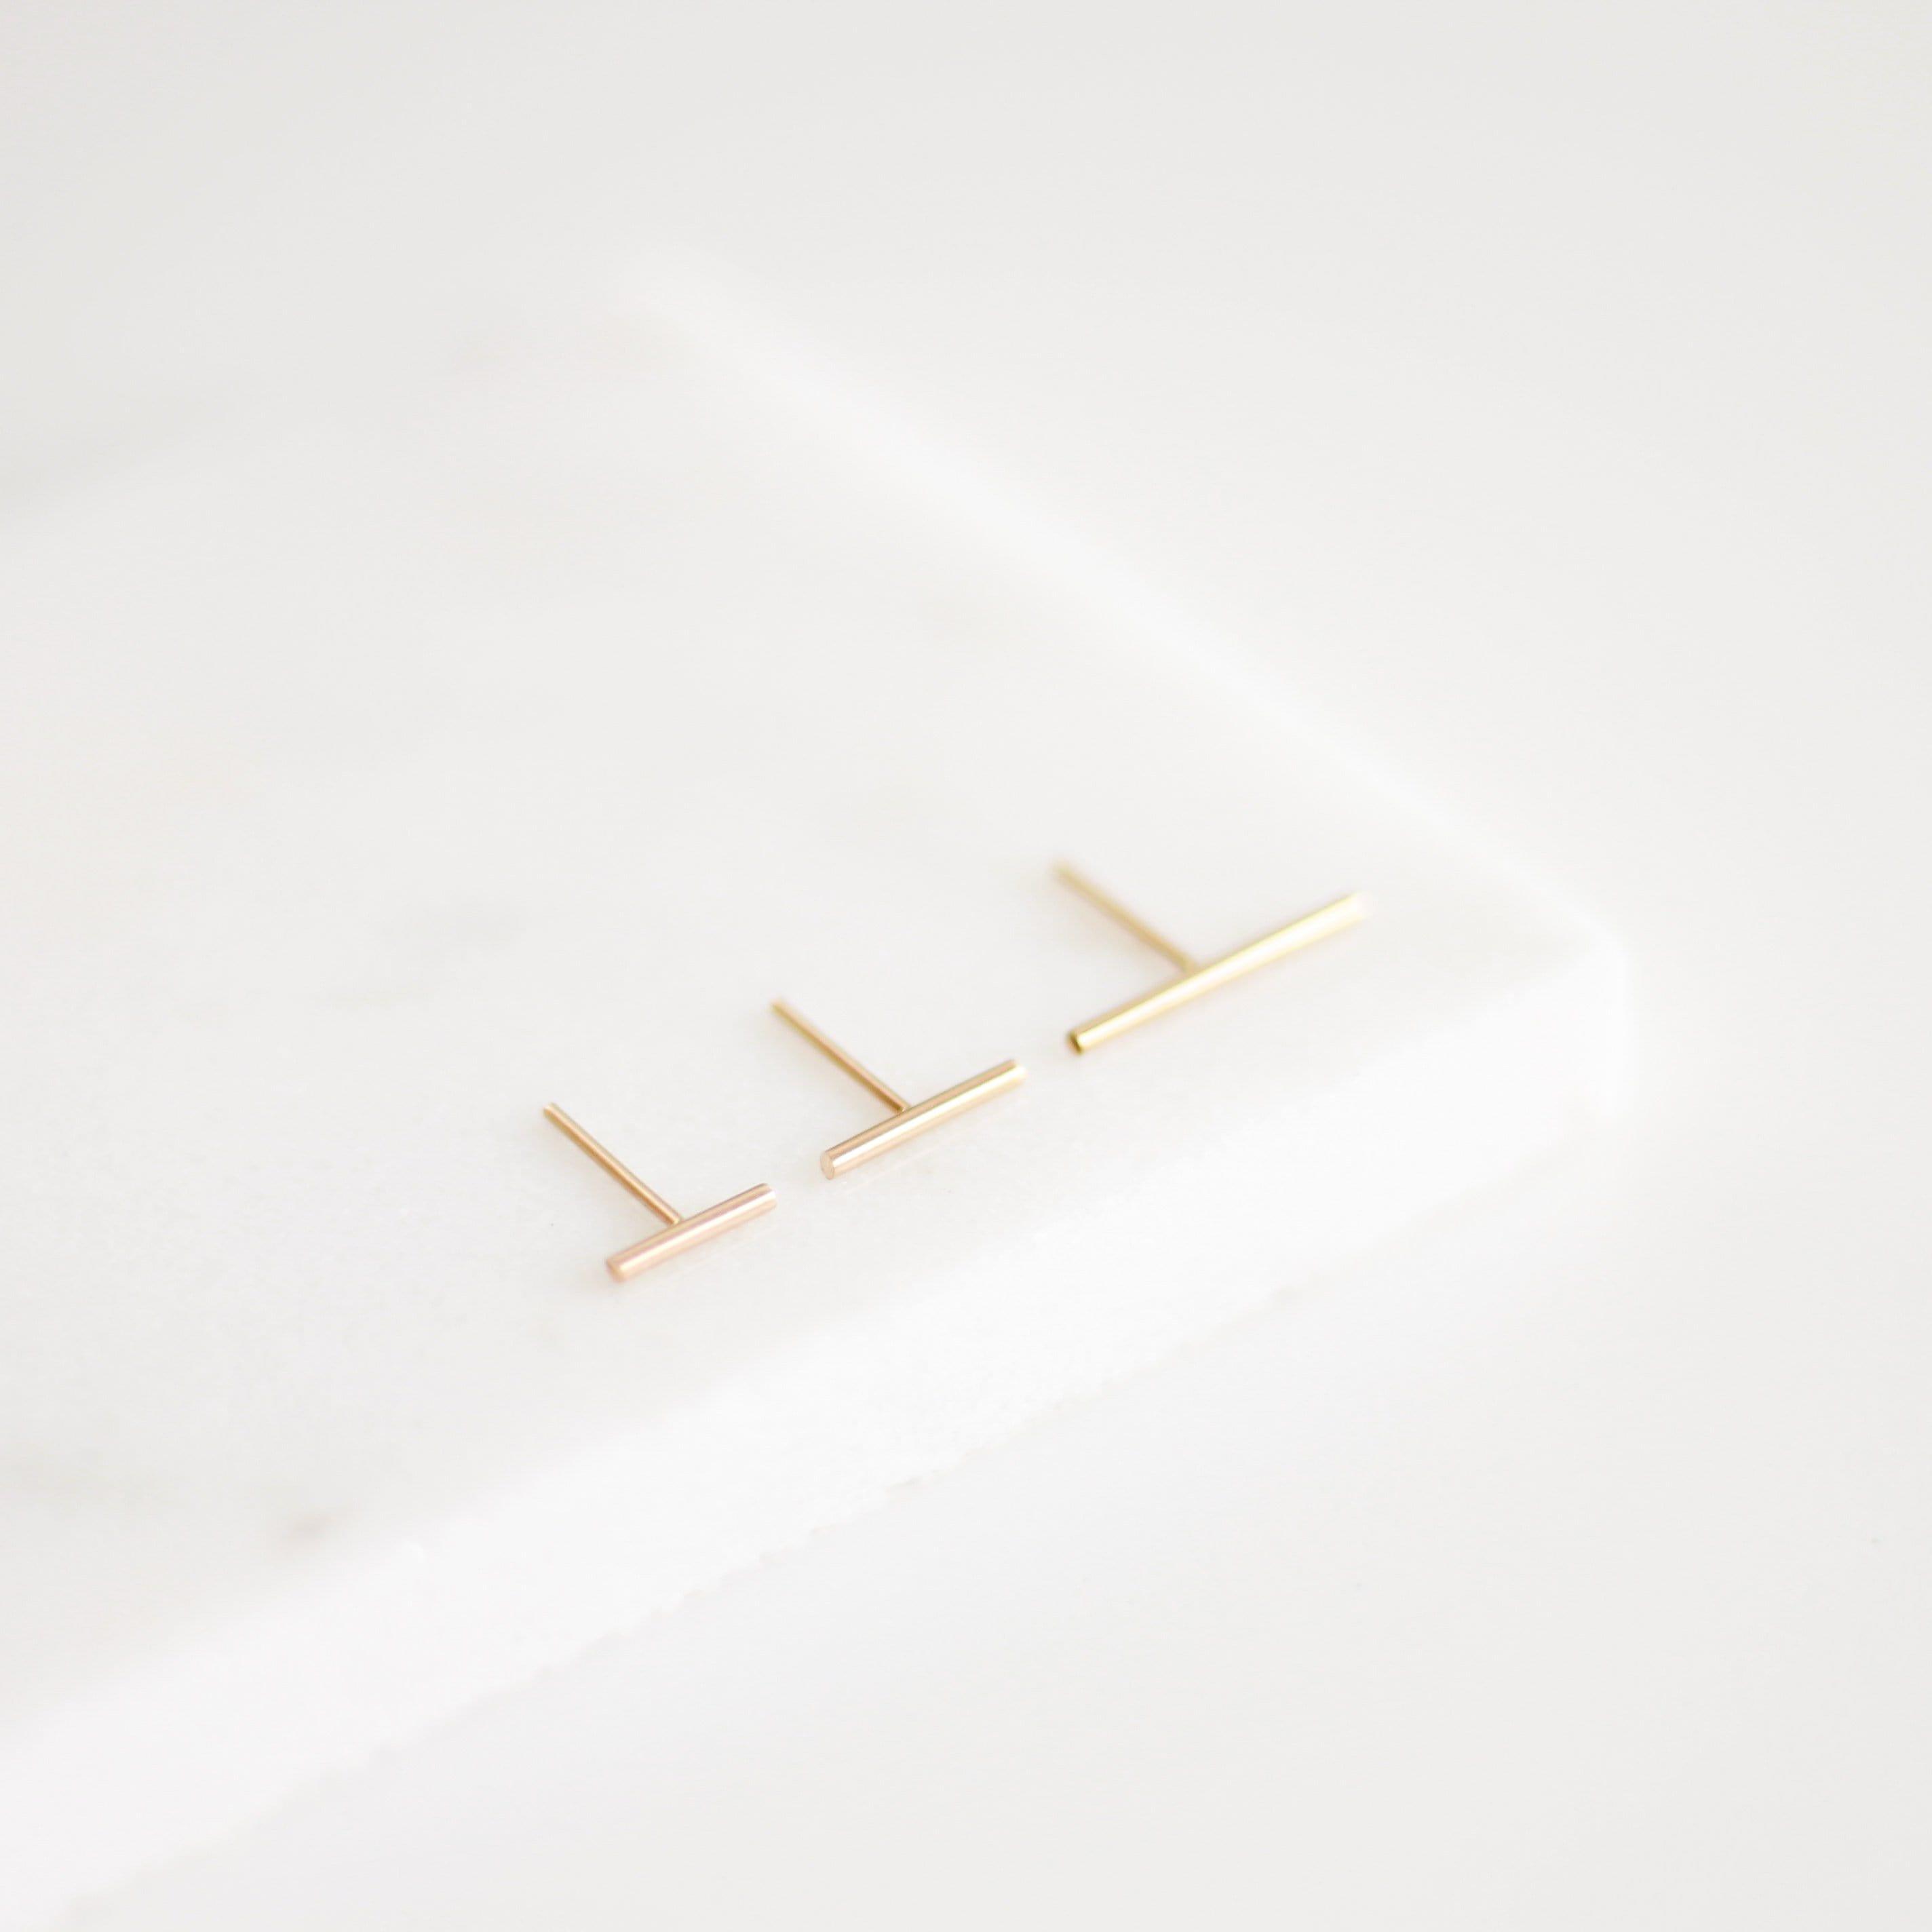 Tiny Bar Stud Earrings - Nolia Jewelry - Meaningful + Sustainably Handcrafted Jewelry